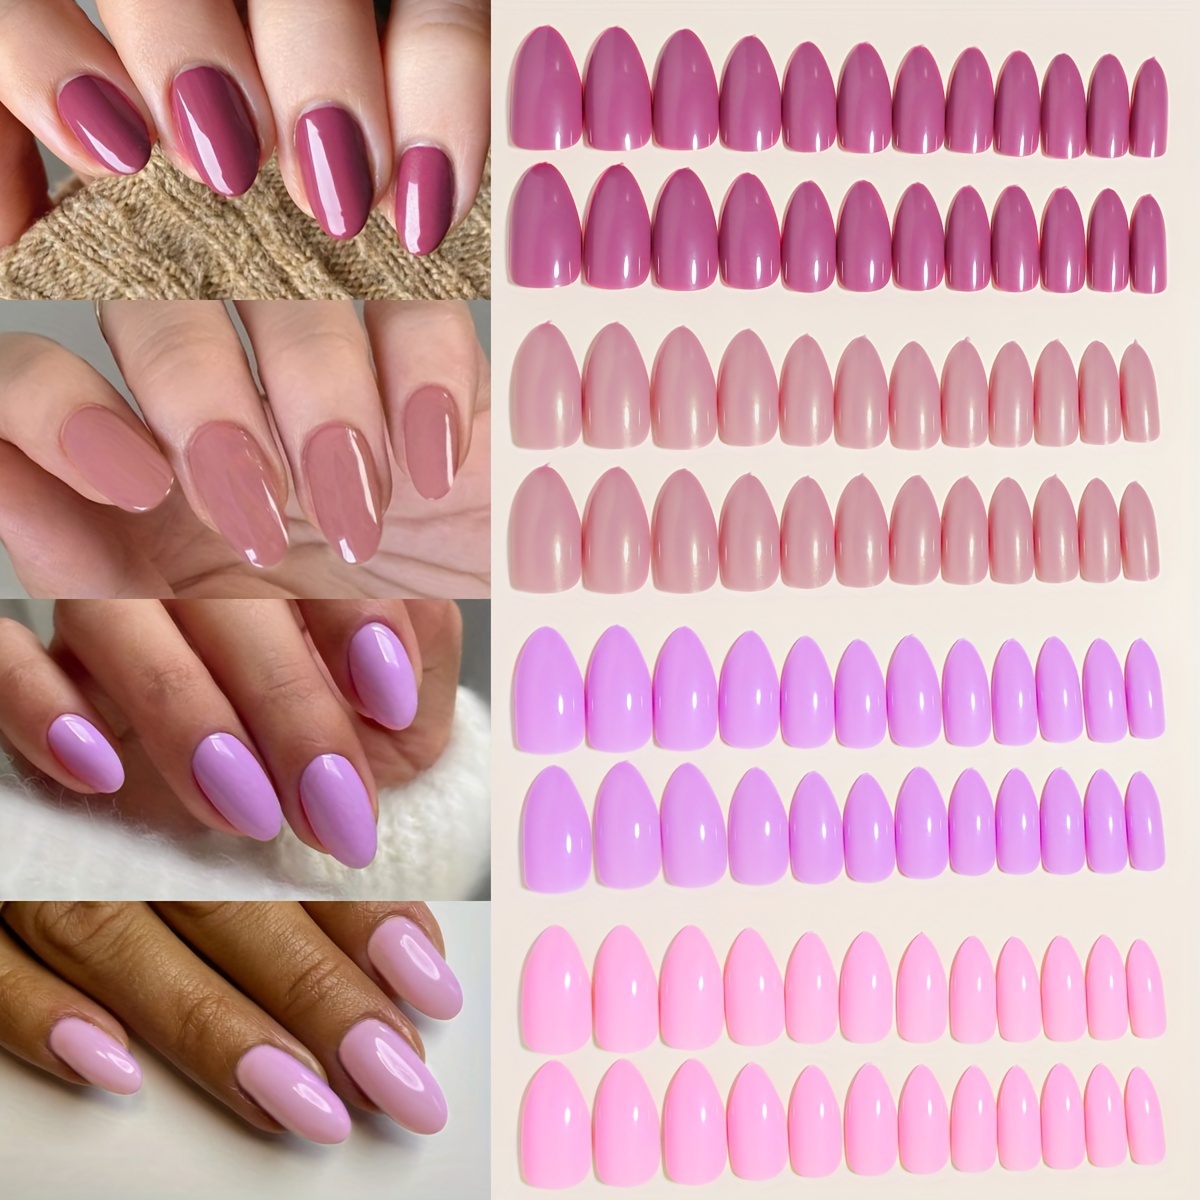 

96-piece Purple Series Almond-shaped Press-on Nails Set - Glossy Finish, Medium Length, Solid Color Fake Nails For Women & Girls With Adhesive Tape & Nail File Included